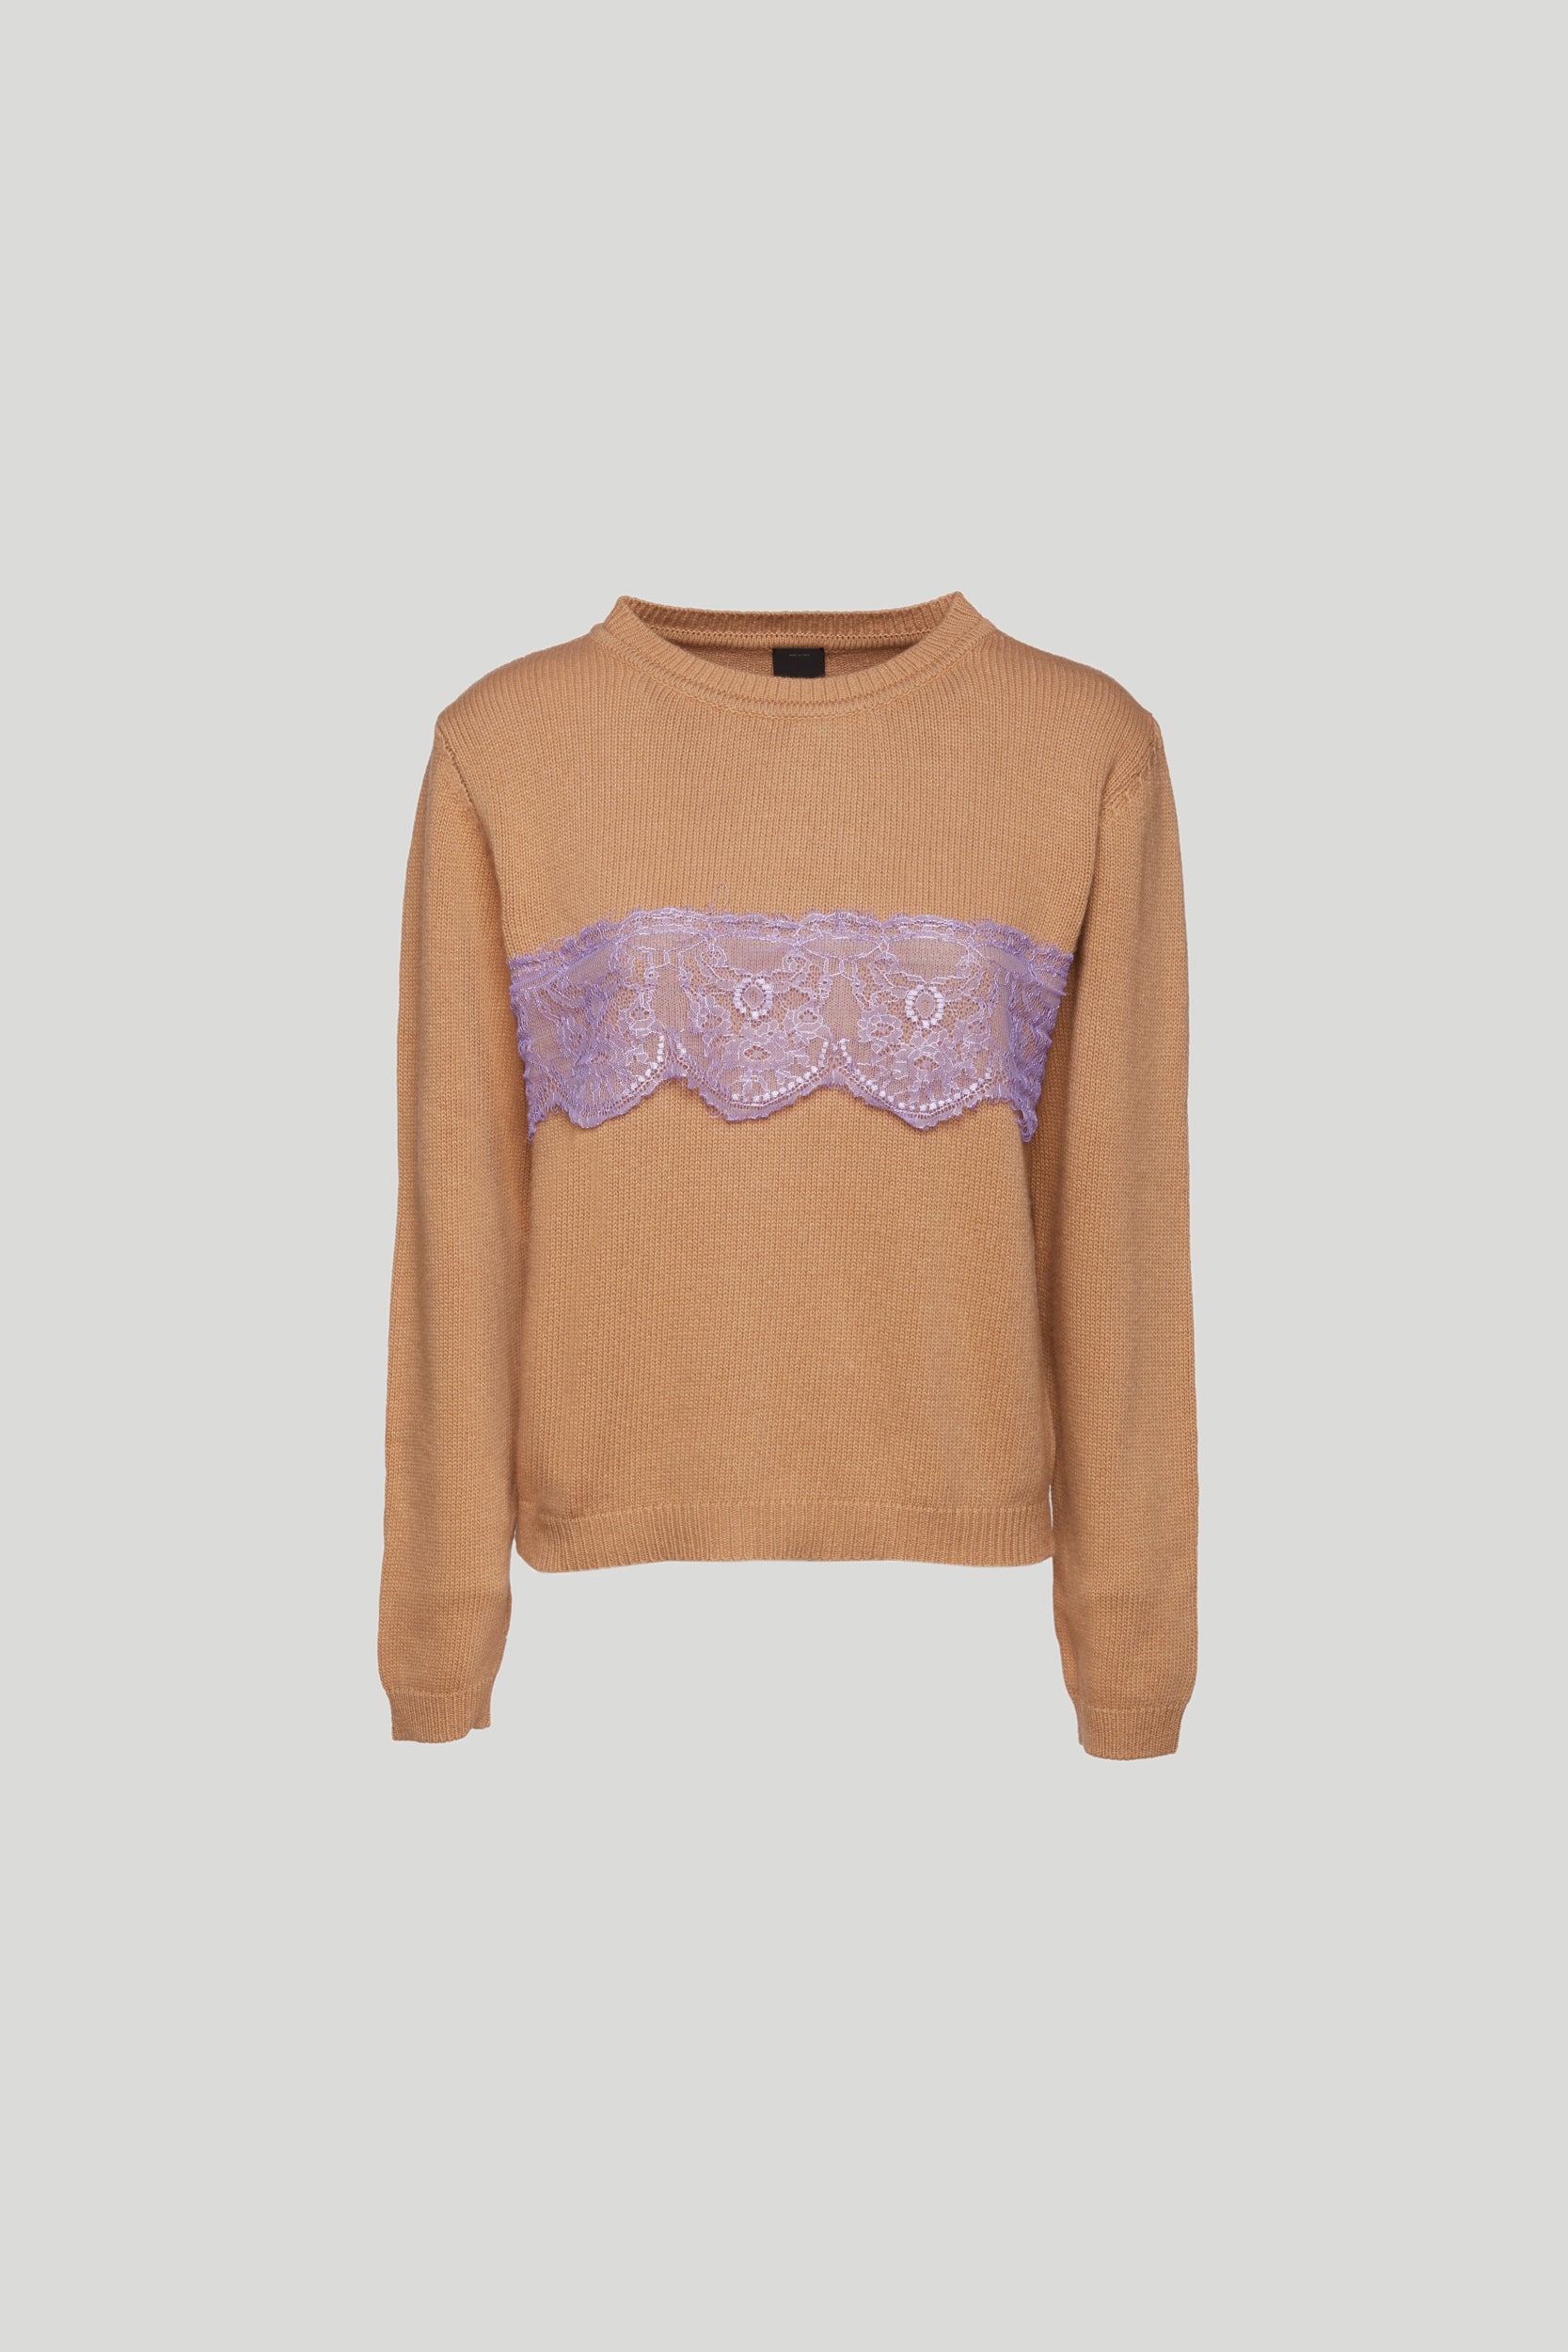 Beige sweater with lilac lace